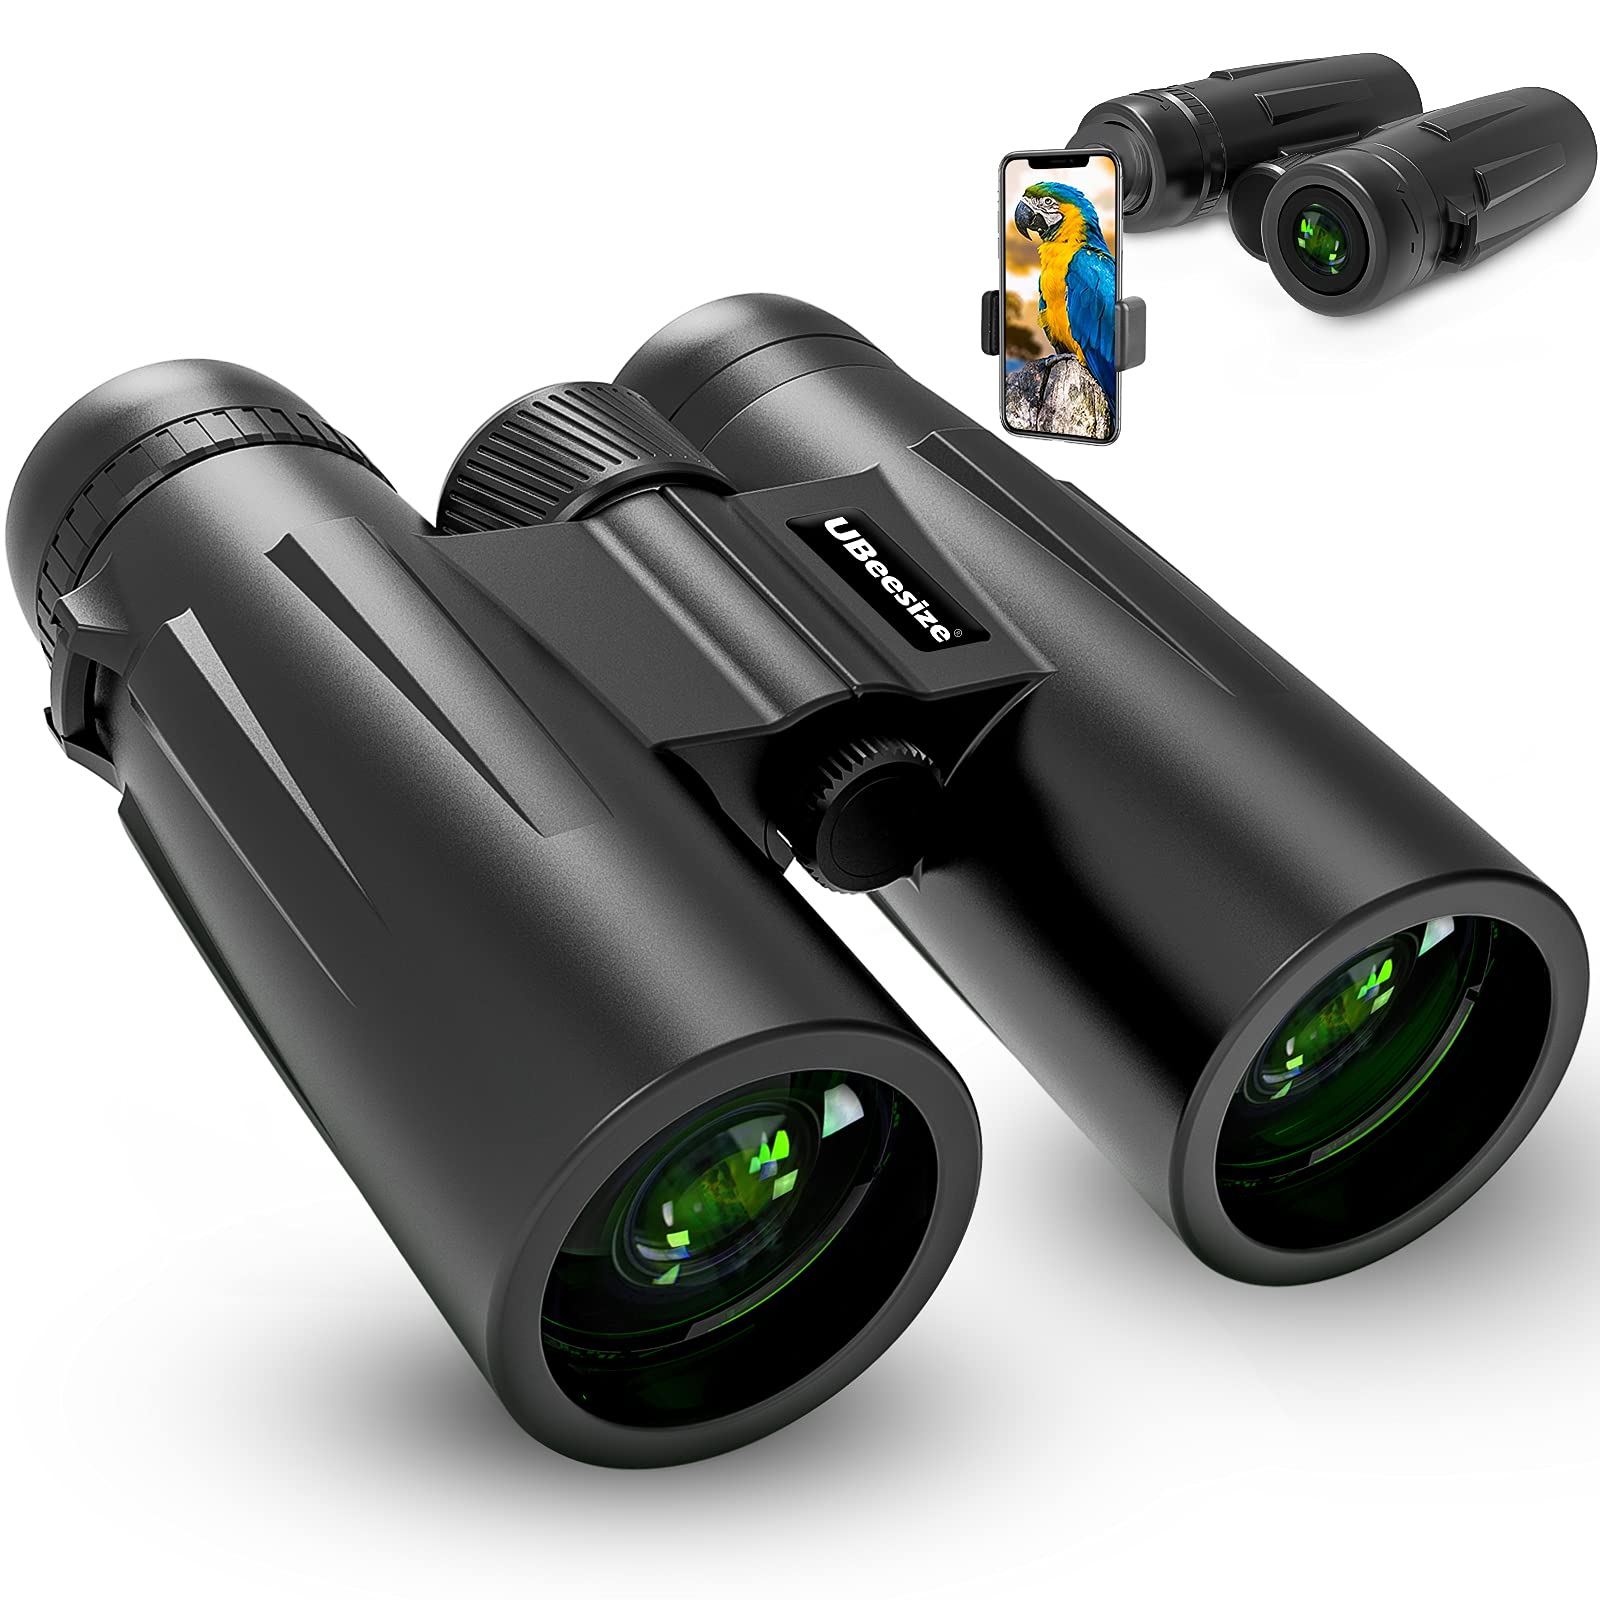 UBeesize 12x42 Compact Binoculars with Universal Phone Holder, Binoculars for Adults with Super Bright and Large View, Lightweight Waterproof Binoculars for Bird Watching, Stargazing and Hunting